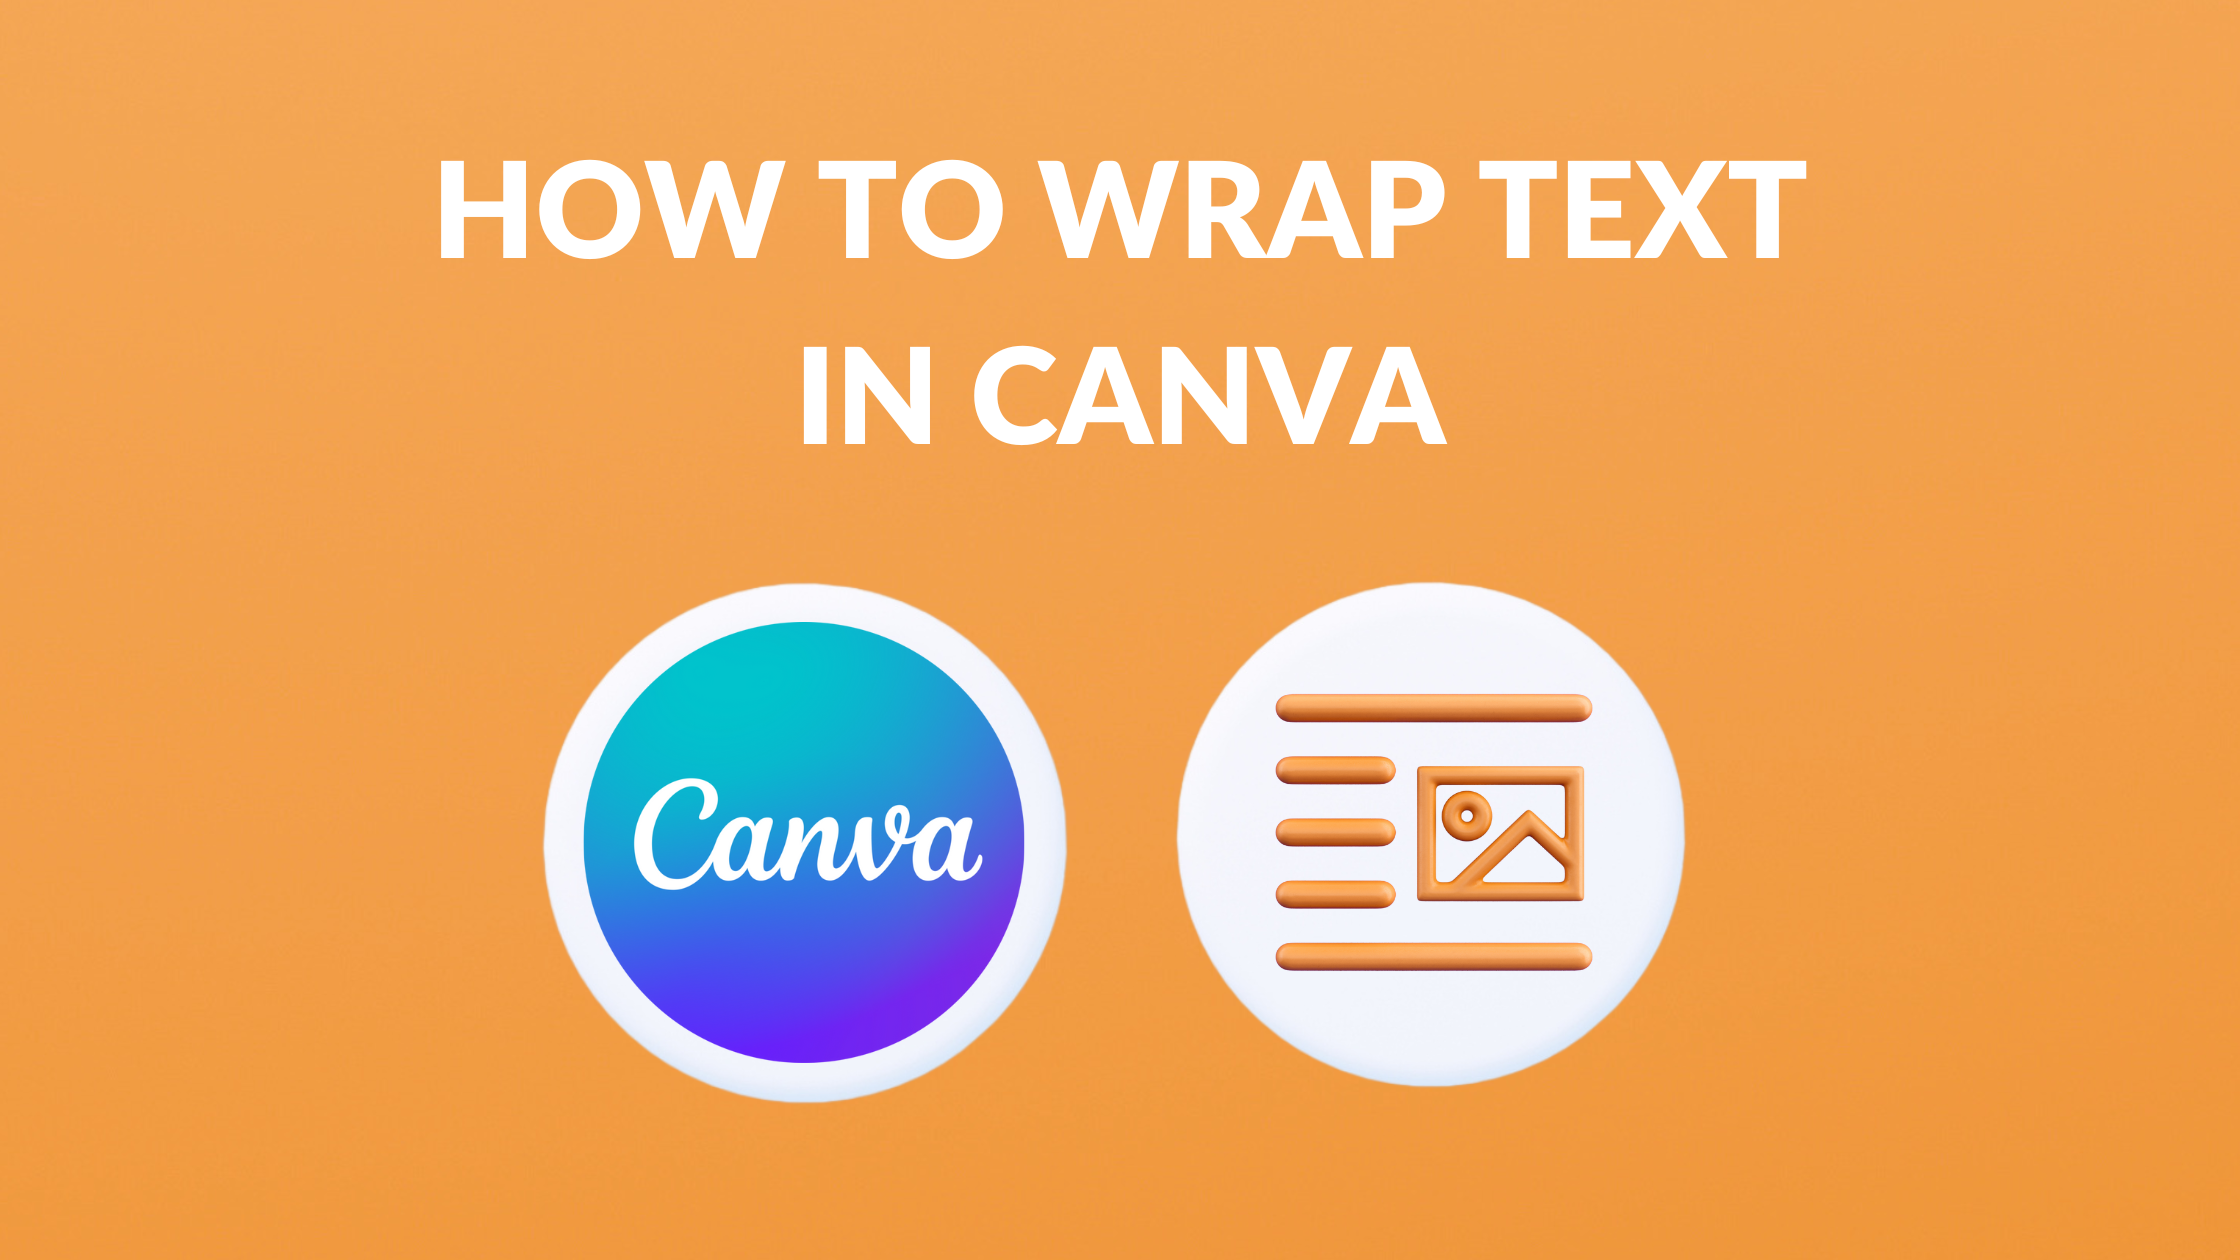 How to Wrap Text in Canva